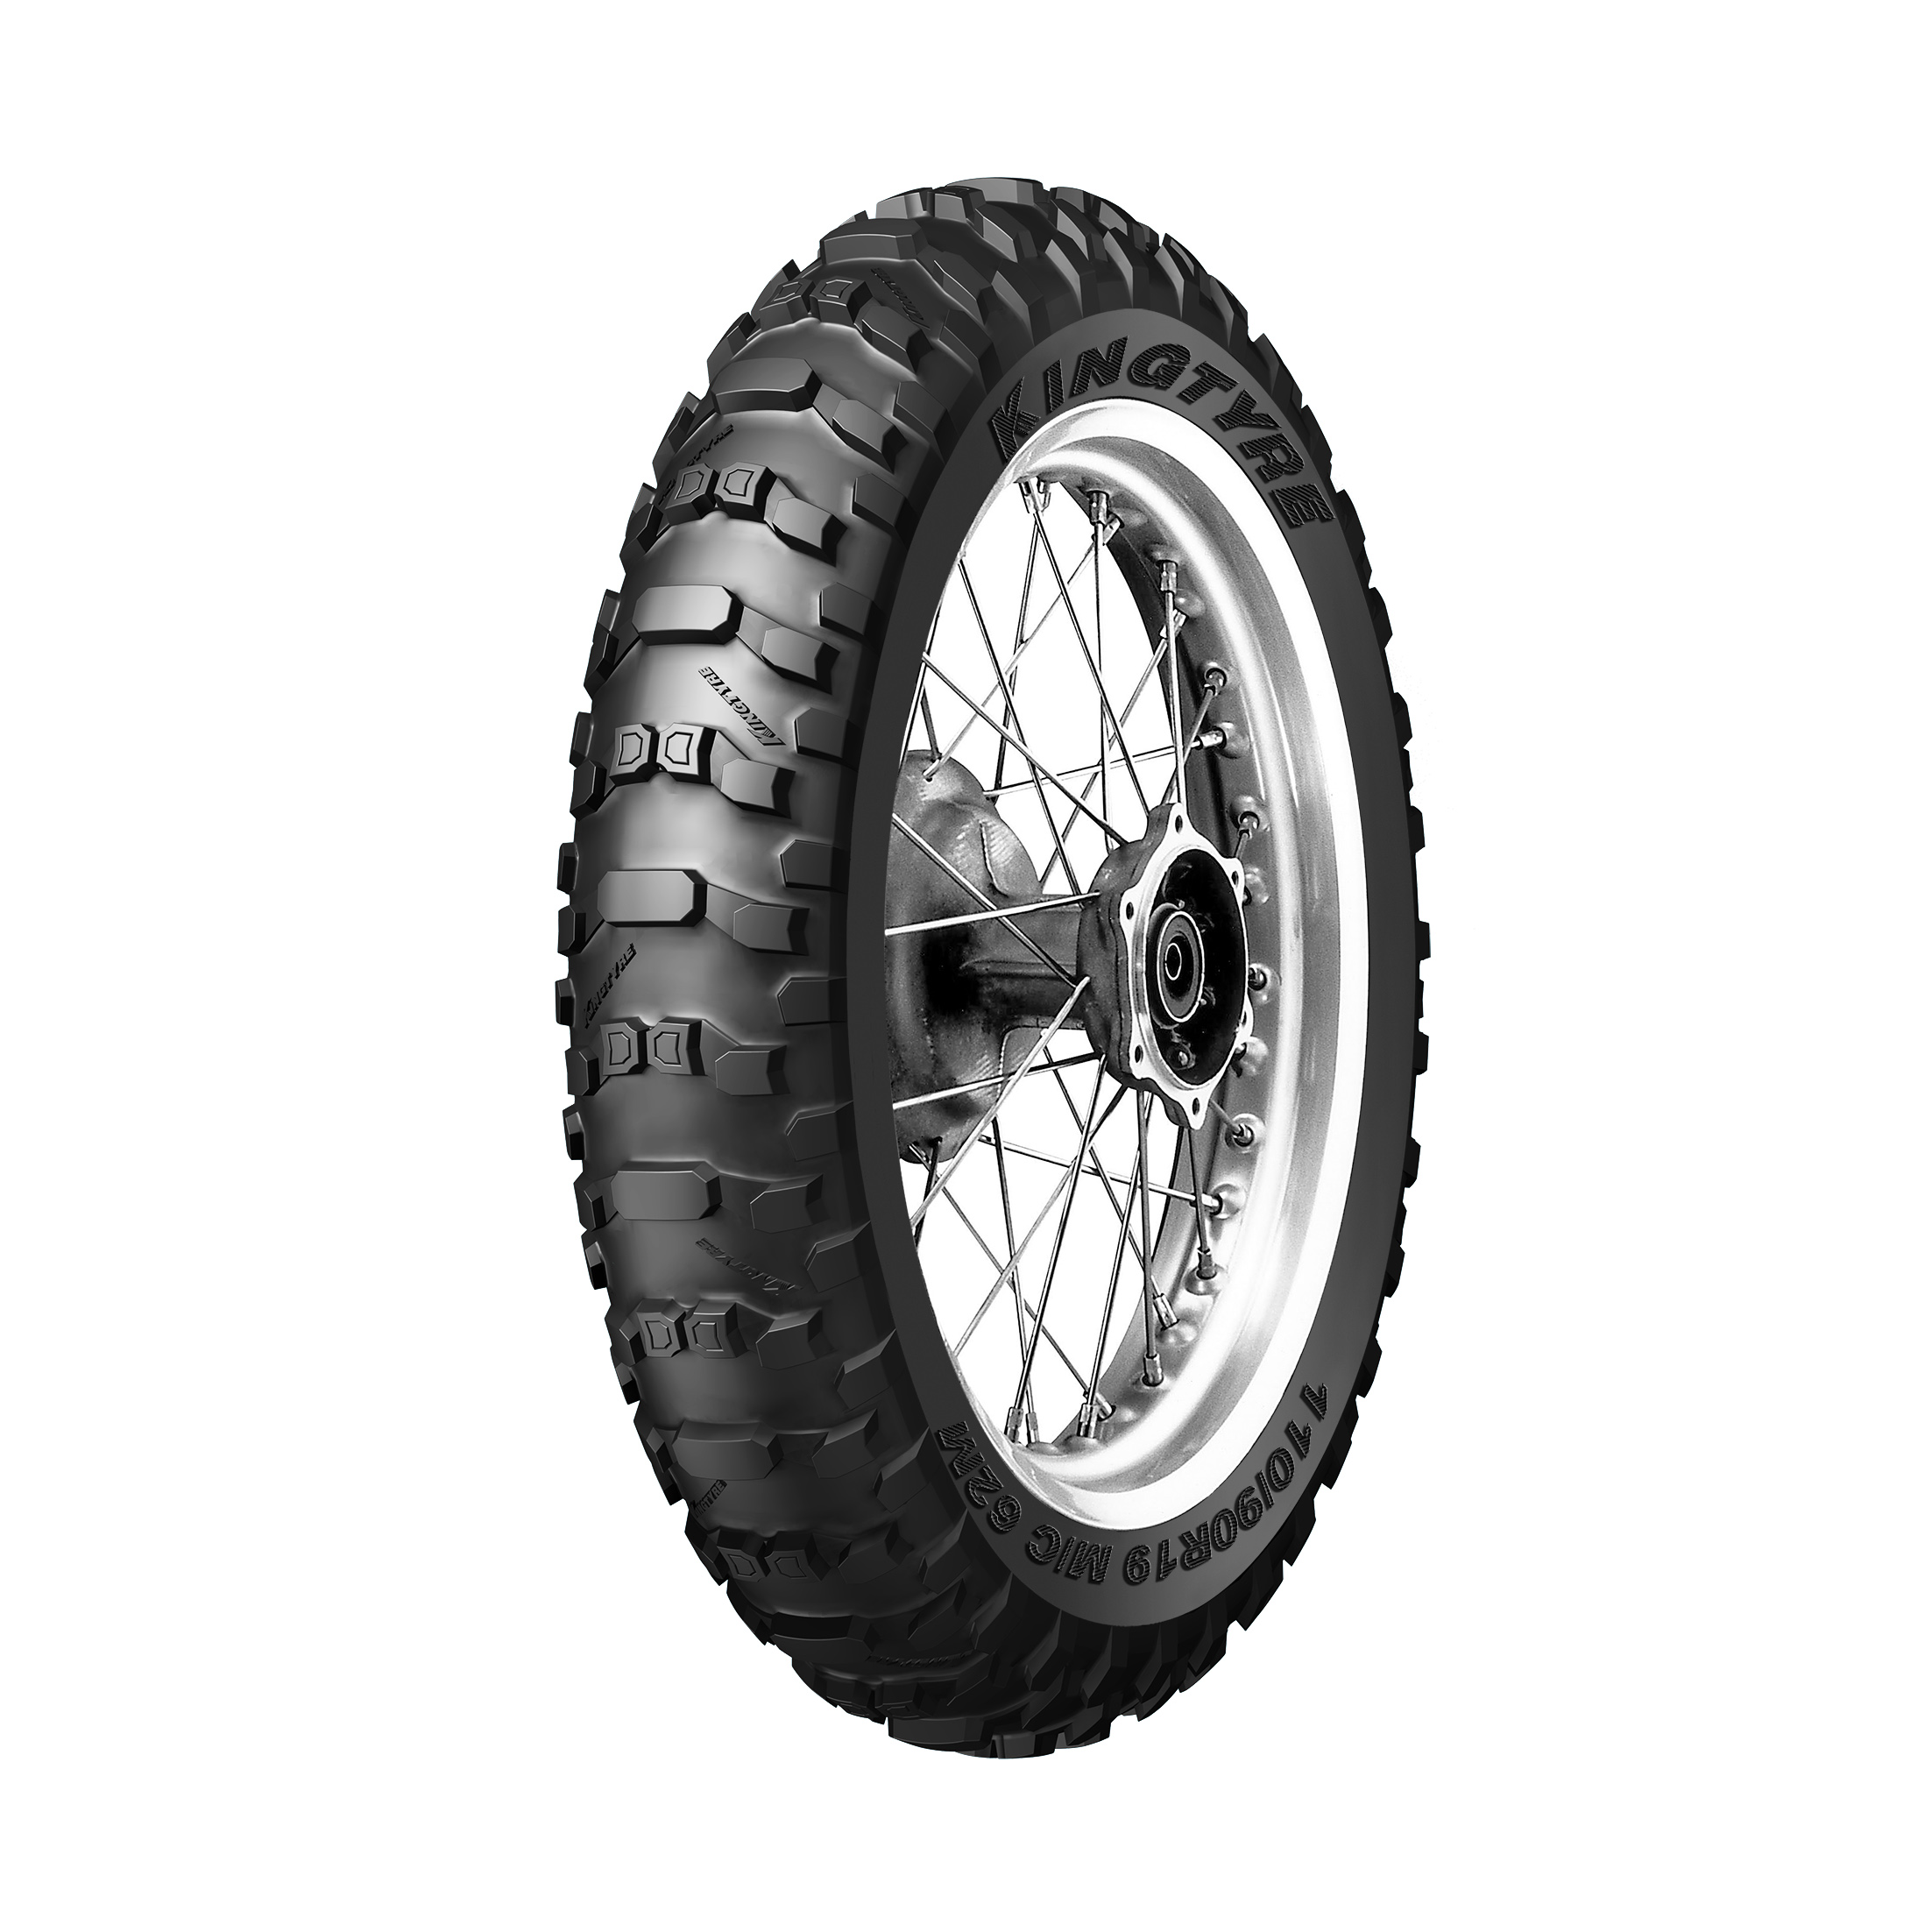 Ordinary Discount 120*70*10 120*90*10 130*60*10 Moto Tricycle Tyre -
 MOTOCROSS OFF ROAD TIRE K83 – Willing